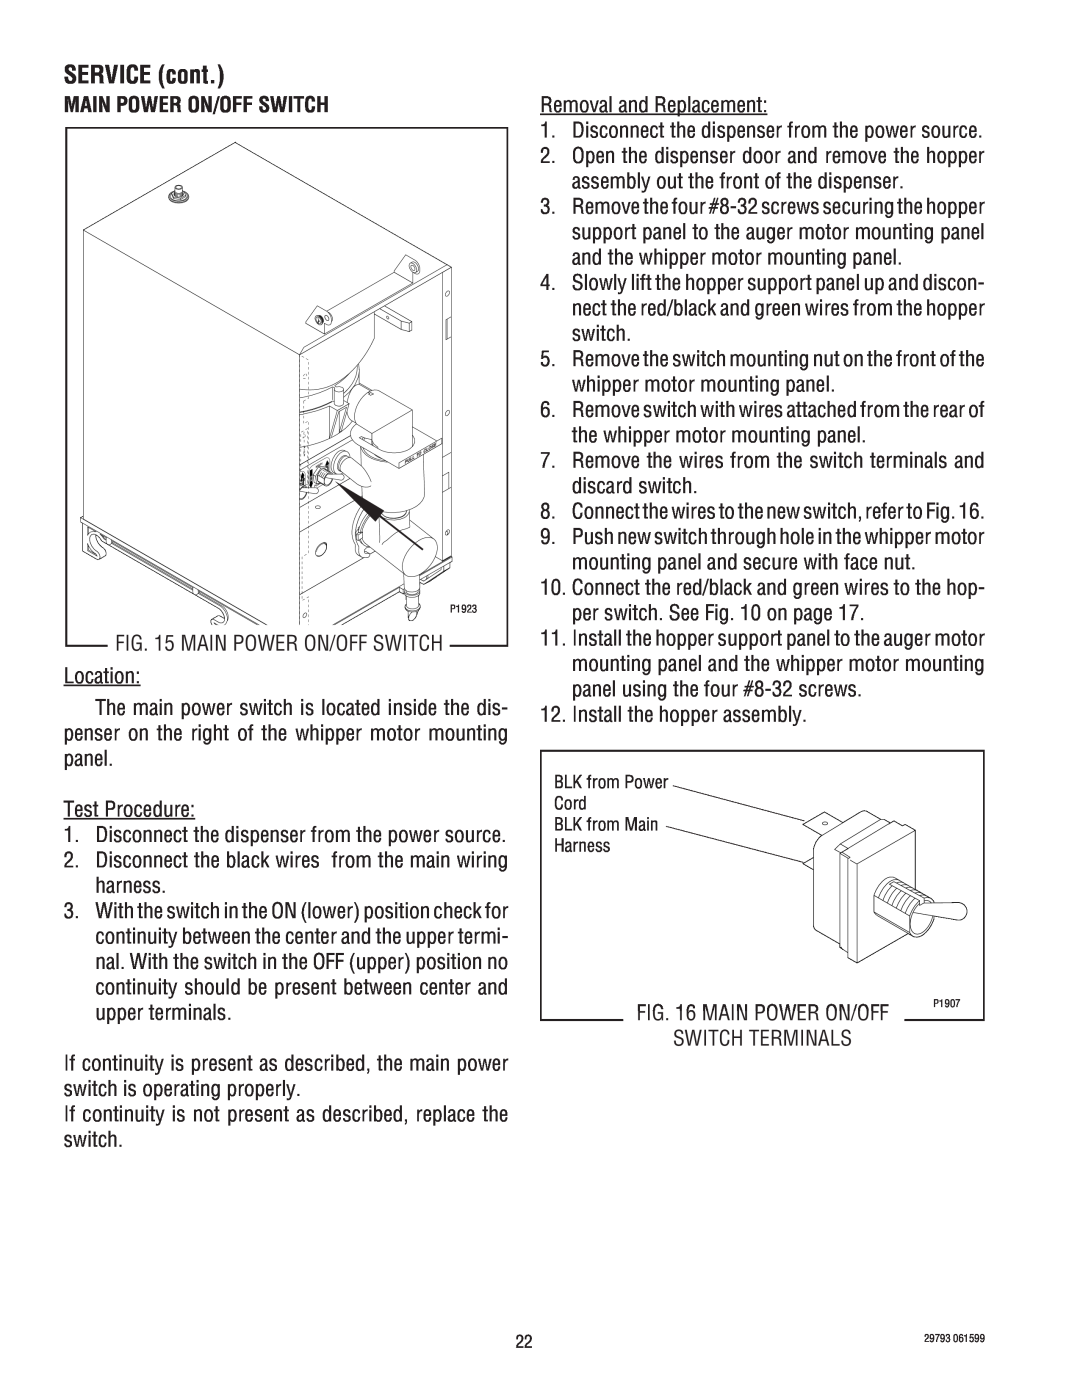 Bunn CDS-3, CDS-2 service manual Main Power On/Off Switch, SERVICE cont 